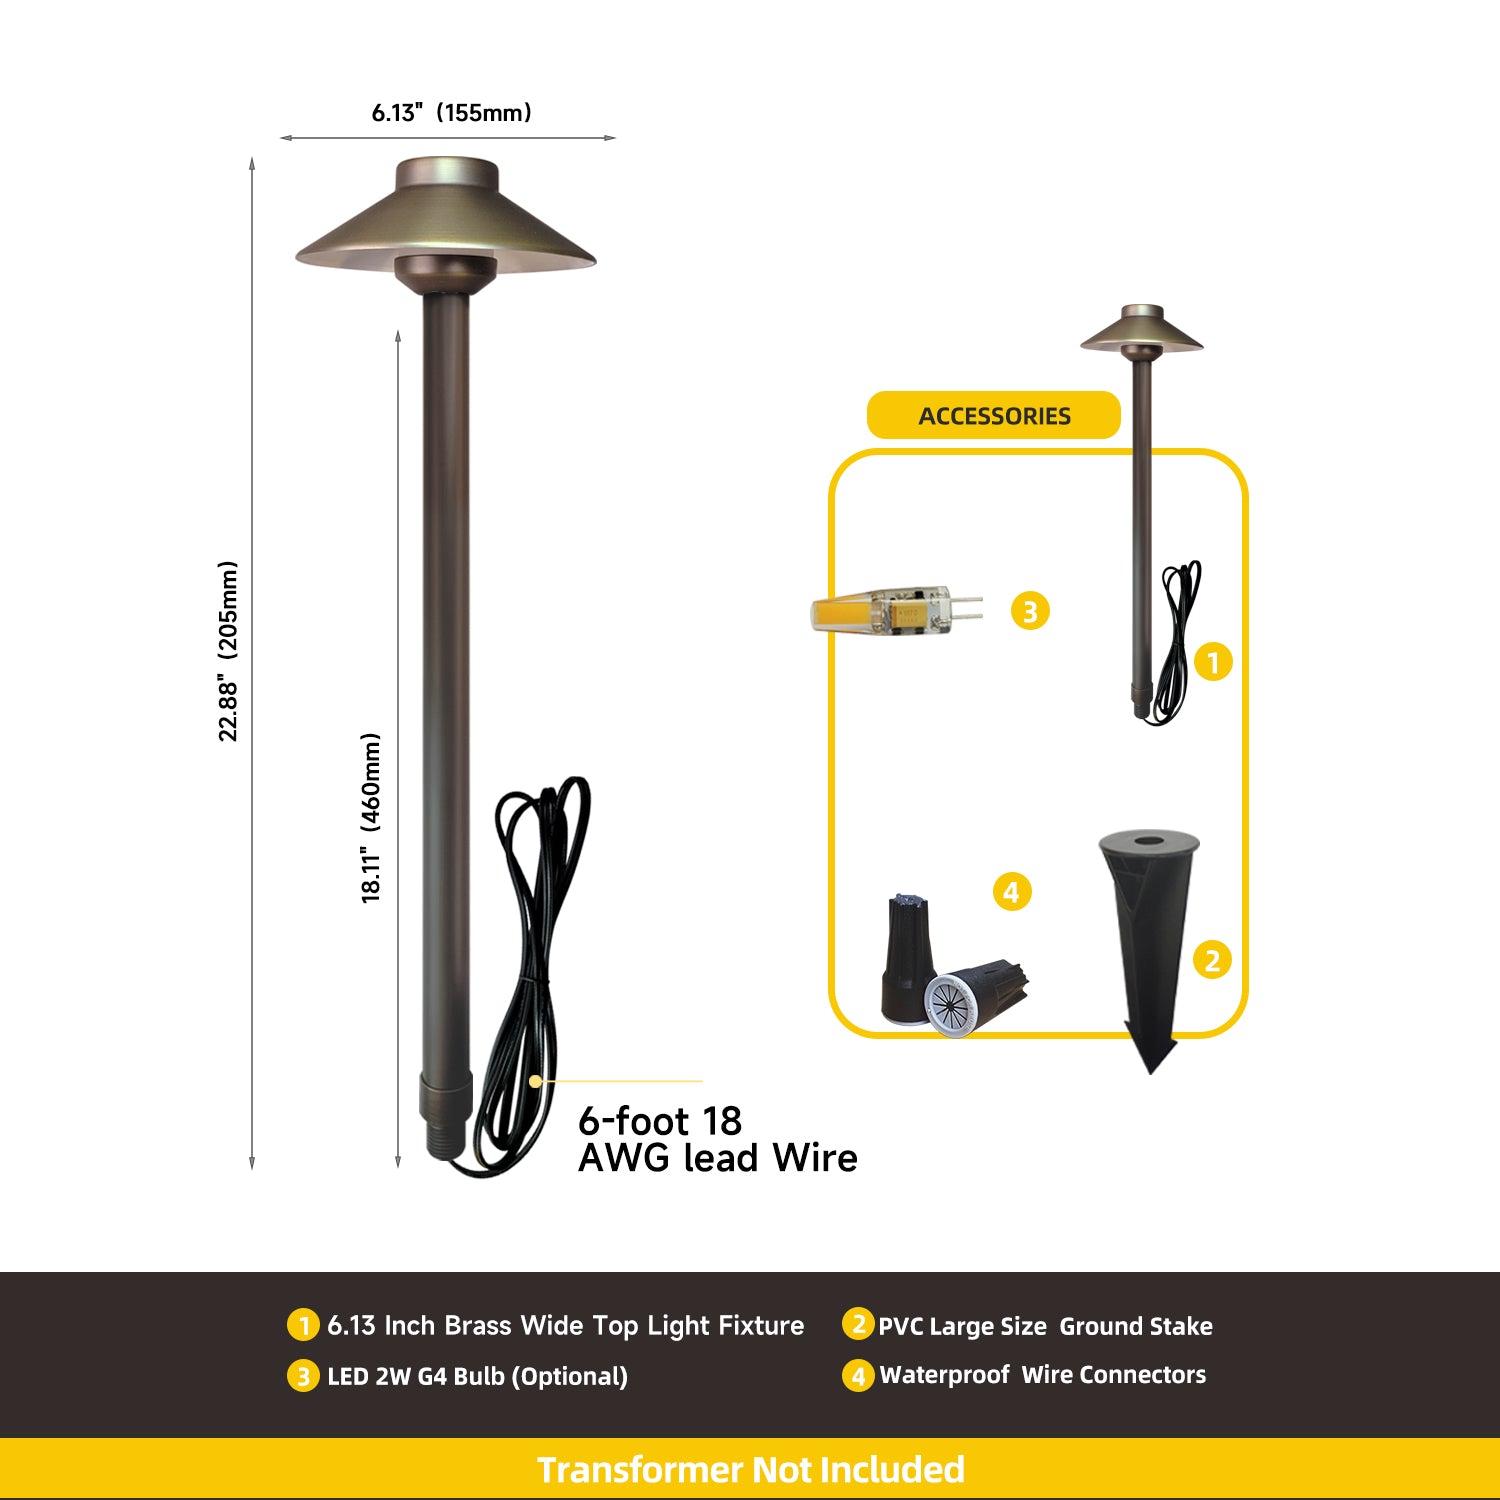 12V Low Voltage Brass Garden Path Light COP602B with 6.13-inch brass wide top light fixture, 22.88-inch height, 6-foot 18 AWG lead wire, LED 2W G4 bulb, PVC large size ground stake, and waterproof wire connectors. Transformer not included.